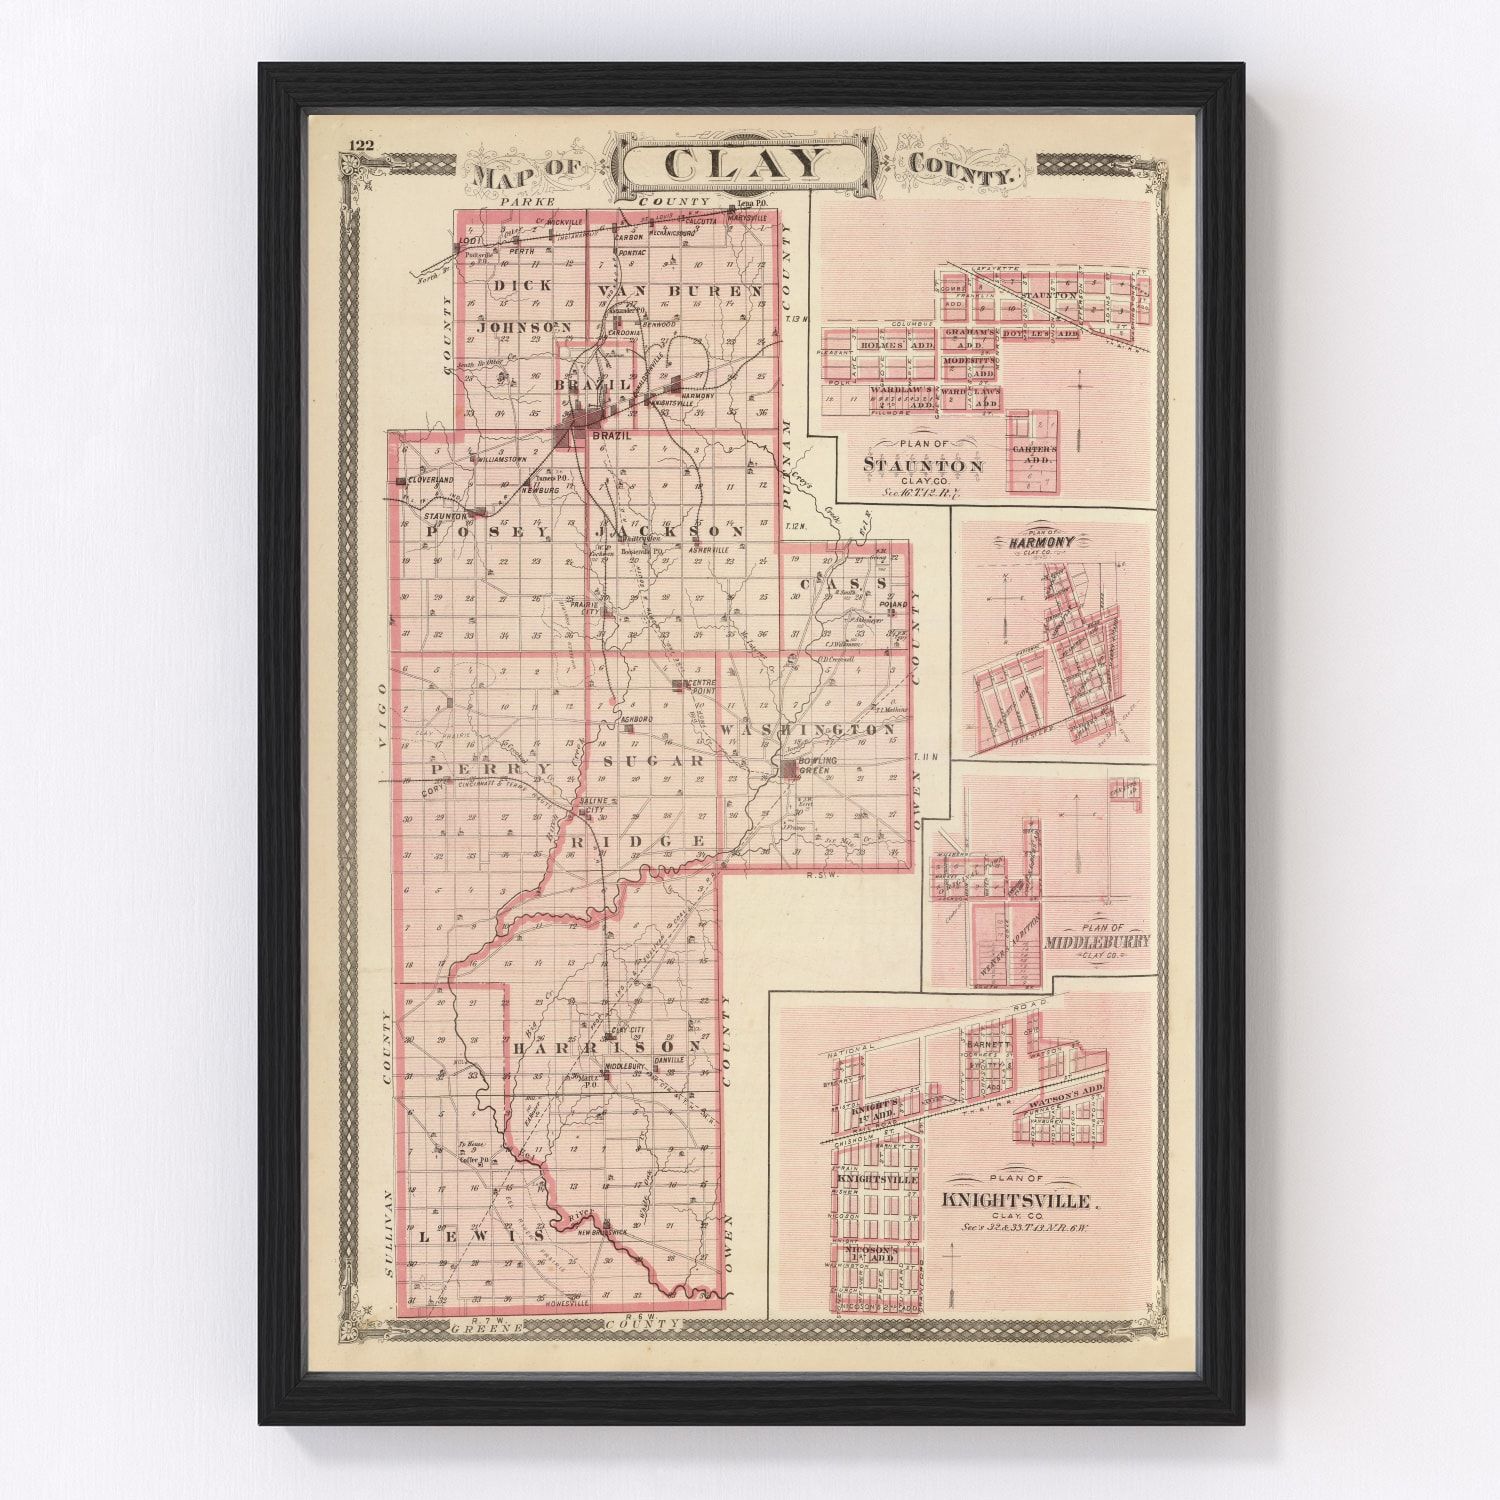 Vintage Map Of Clay County Indiana 1876 By Teds Vintage Art